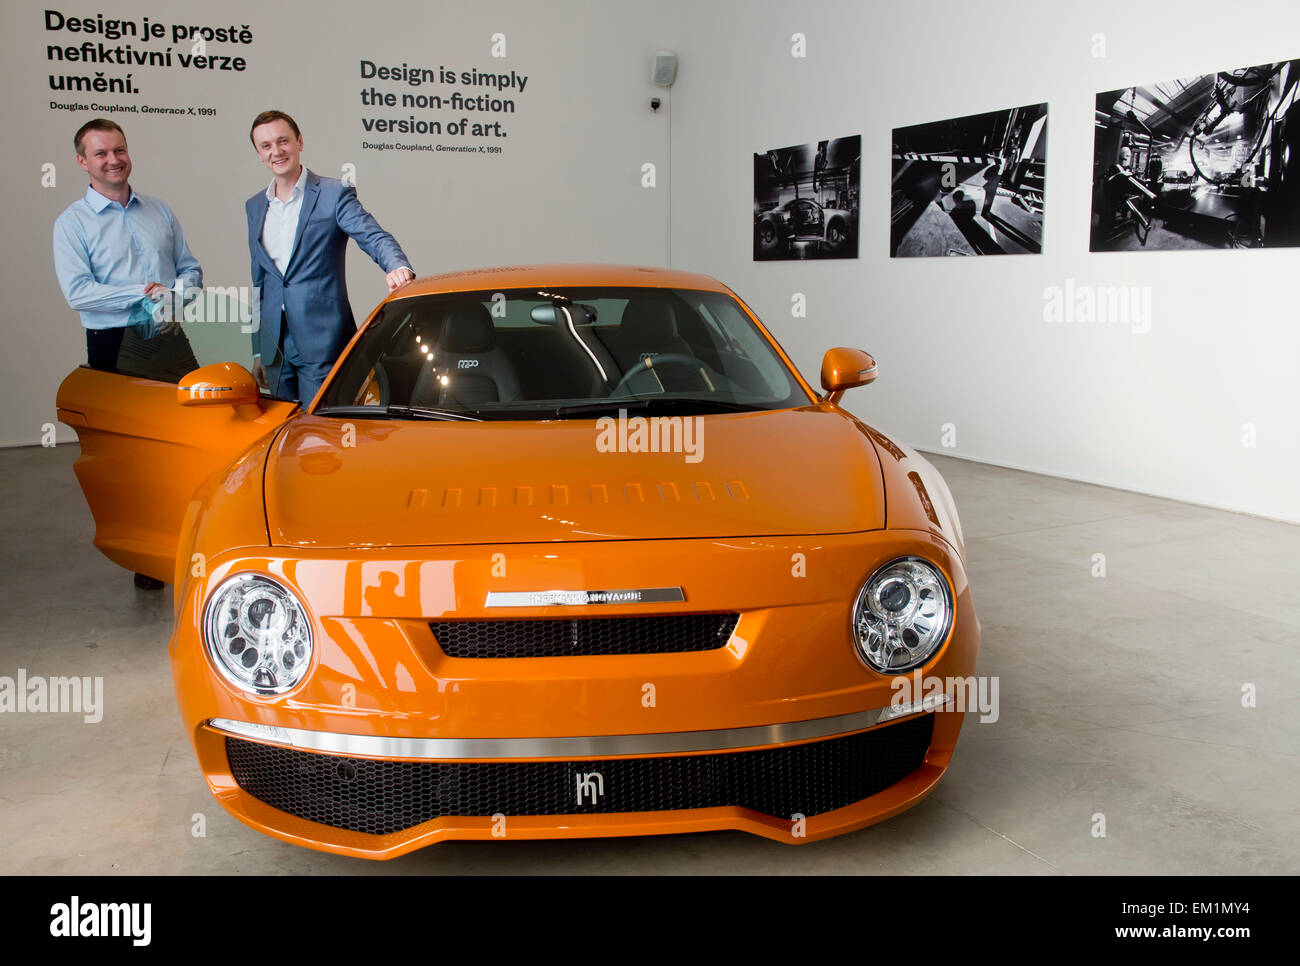 Contemporary Art, Prague. 15th Apr, 2015. The R200 Non-Fiction new automobile, designed by Petr Novague (right) and Marek Hoffmann (left), inspired by a legendary Czechoslovak automobile Skoda 130 RS, is exhibited in DOX - Centre of Contemporary Art, Prague, Czech Republic, April 15, 2015. © Vit Simanek/CTK Photo/Alamy Live News Stock Photo